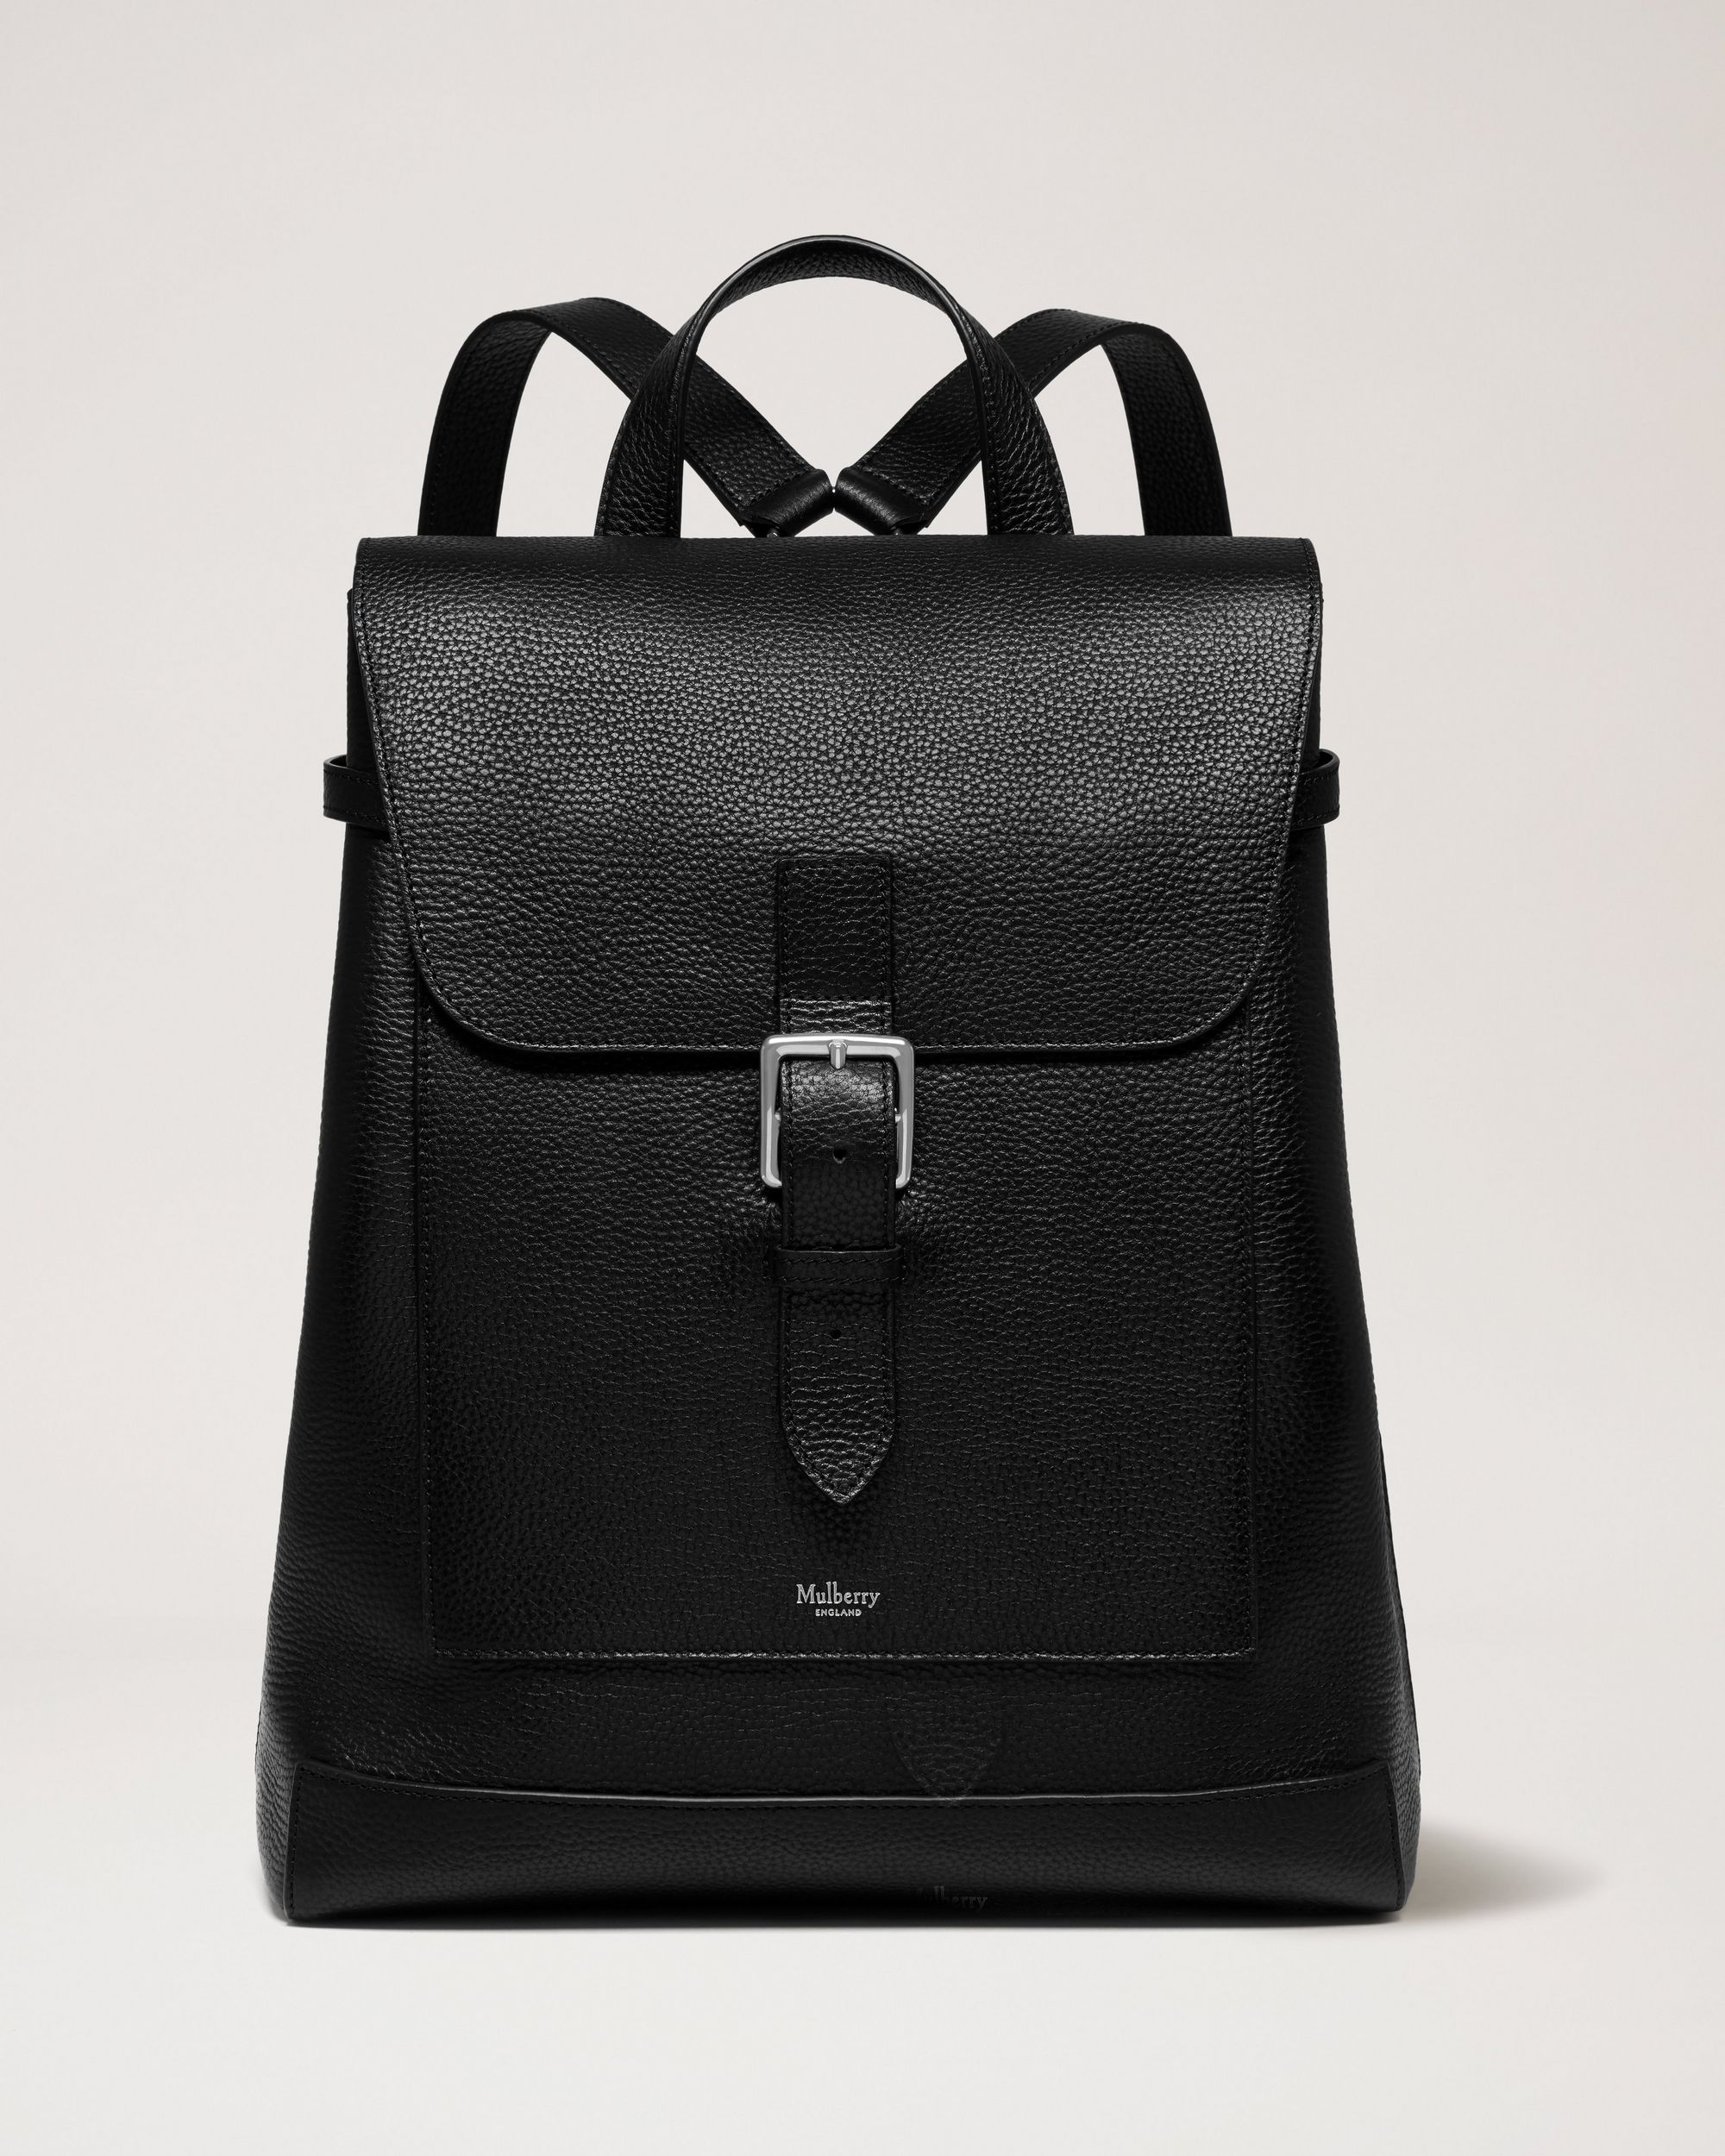 Black Mulberry briefcase backpack